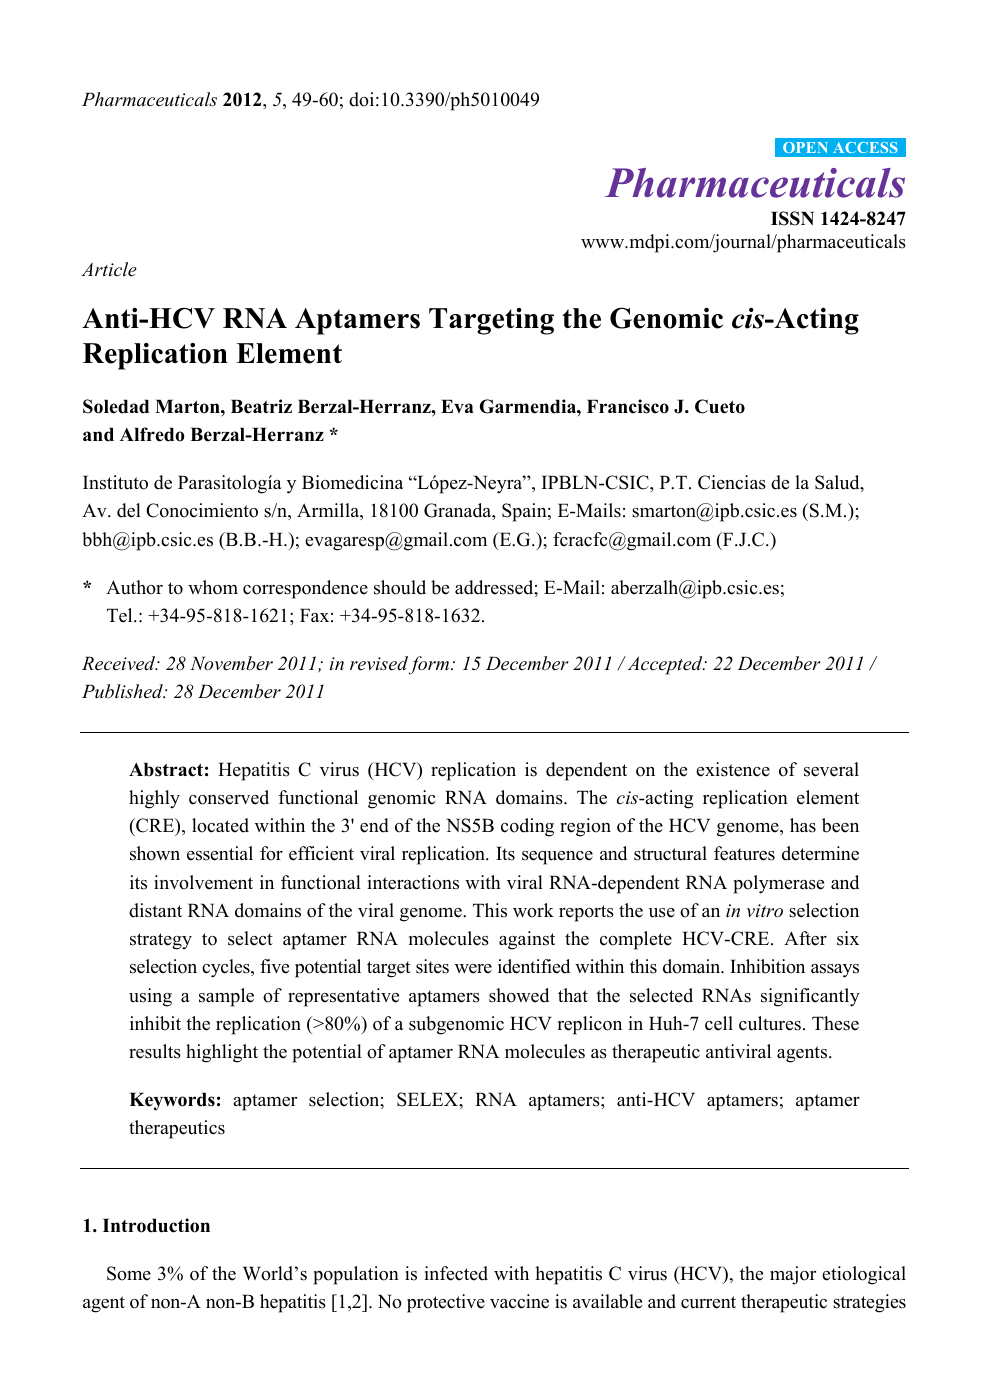 Anti Hcv Rna Aptamers Targeting The Genomic Cis Acting Replication Element Topic Of Research Paper In Biological Sciences Download Scholarly Article Pdf And Read For Free On Cyberleninka Open Science Hub